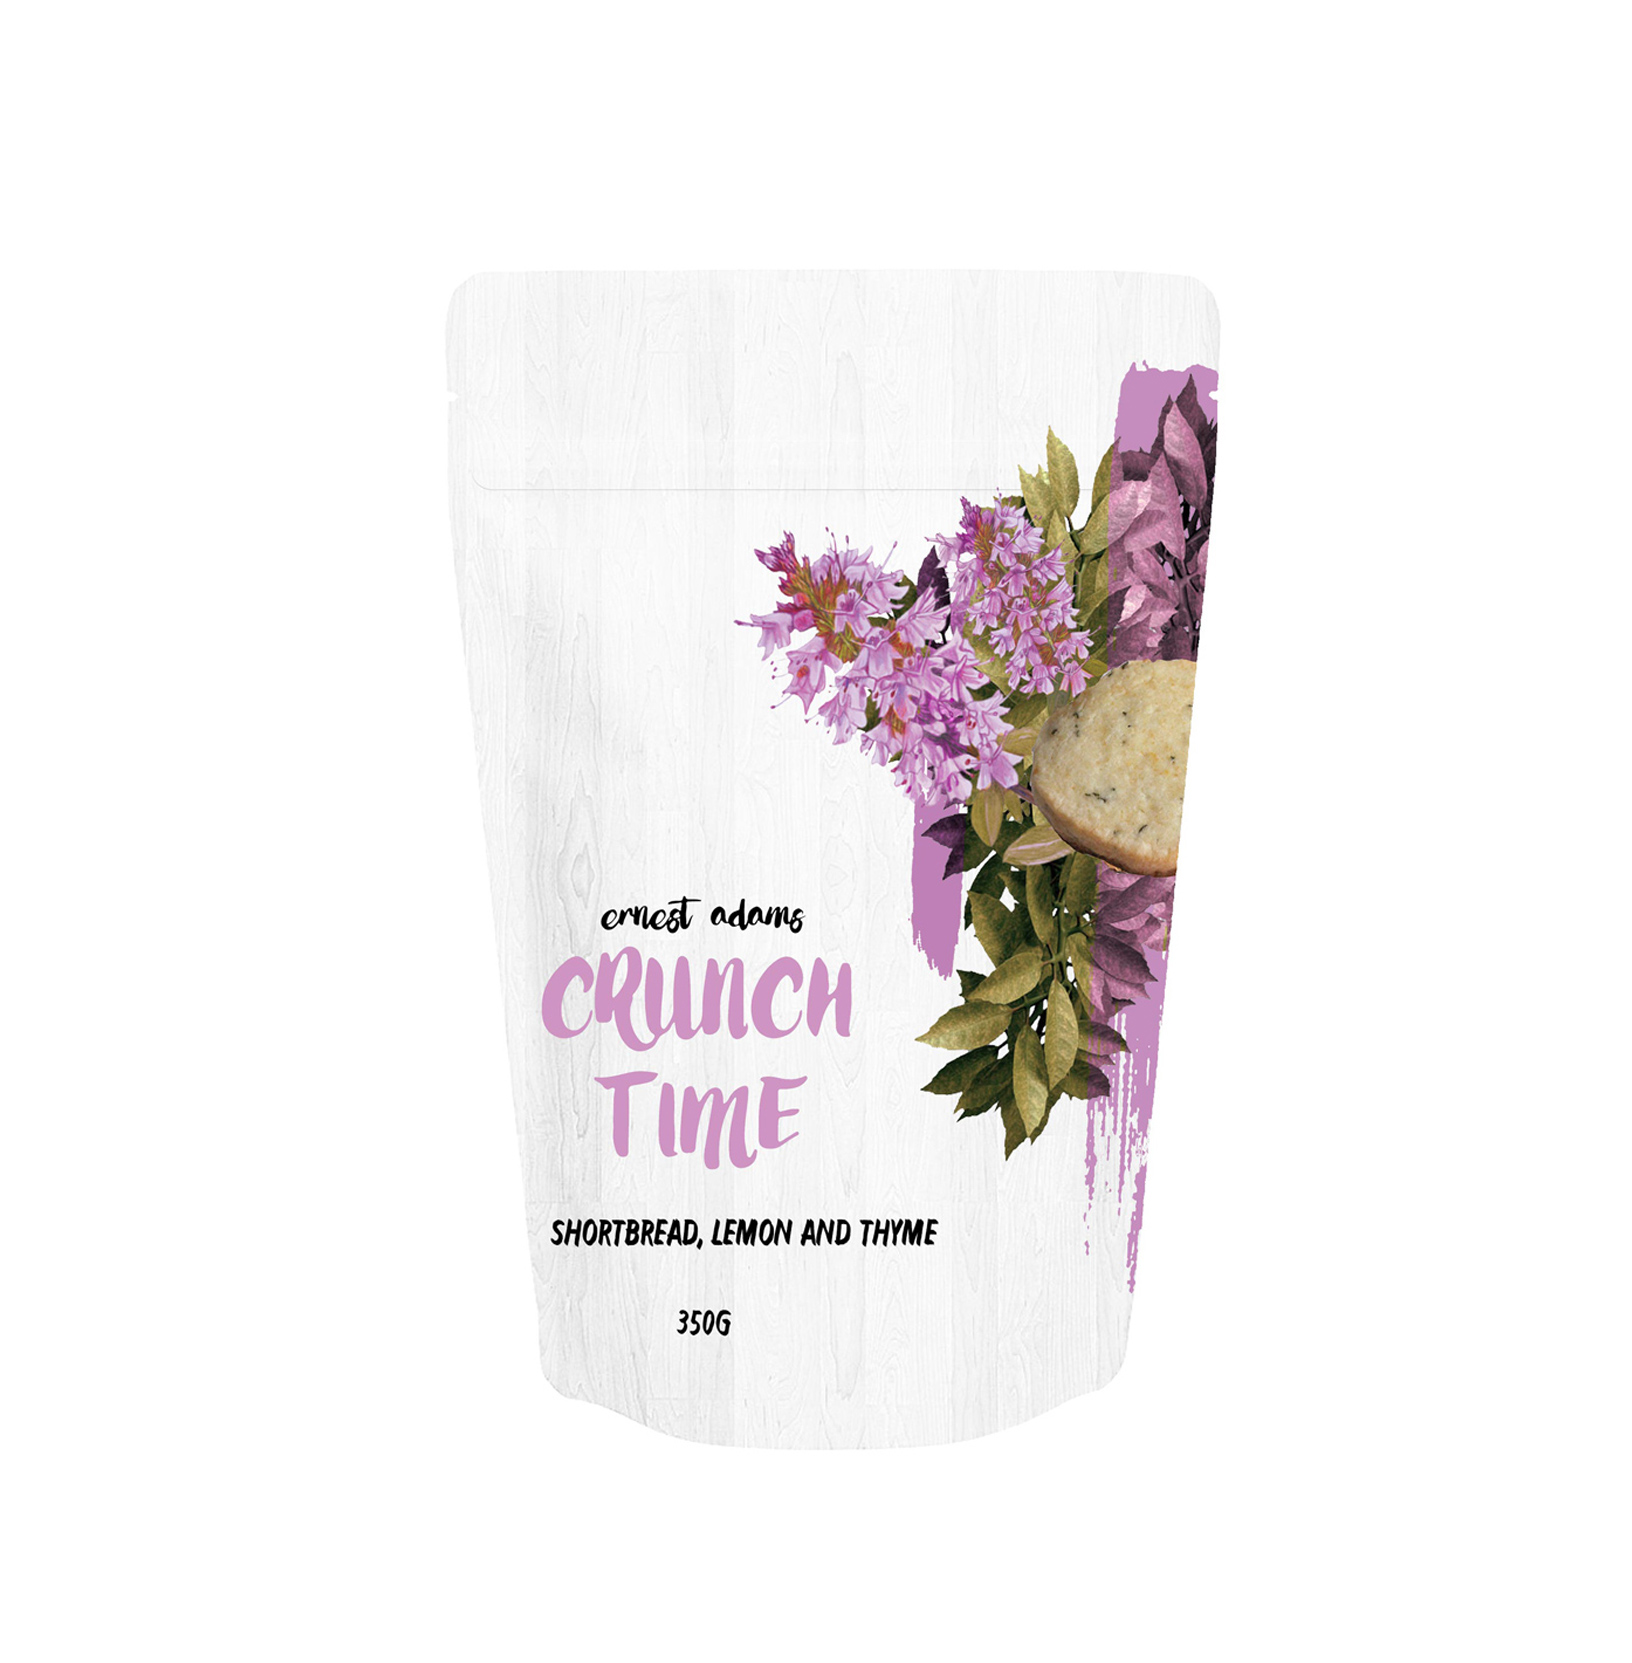 crunch time shortbread lemon and thyme packaging